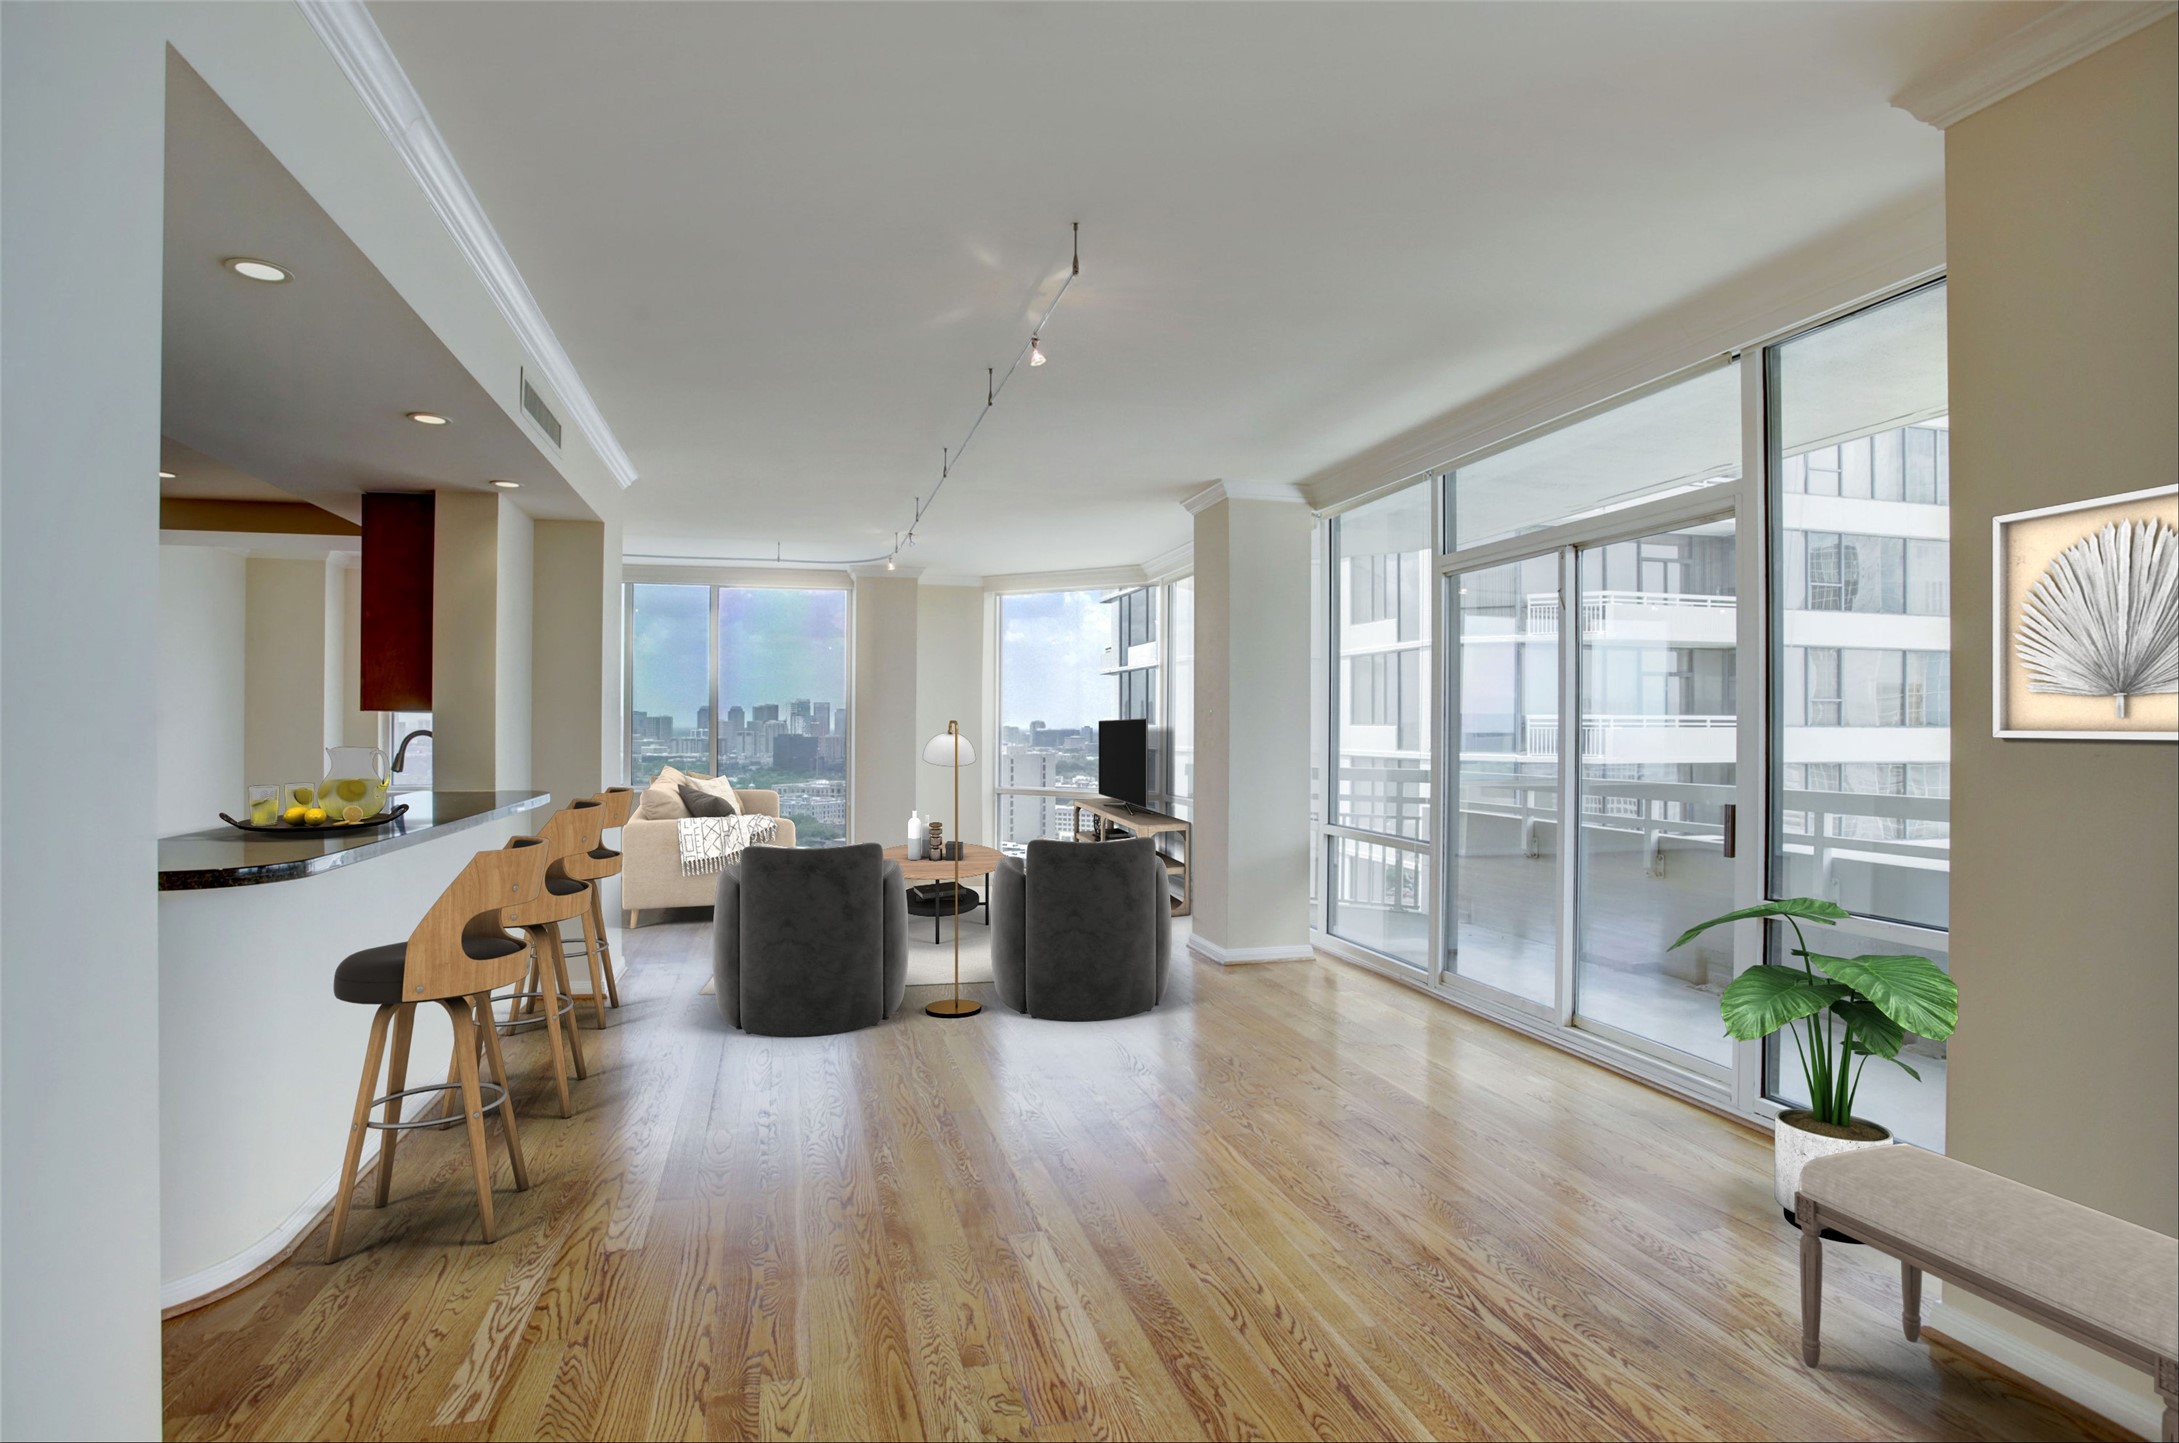 This Penthouse home has open concept kitchen, living and dining with wonderful views (virtually staged).